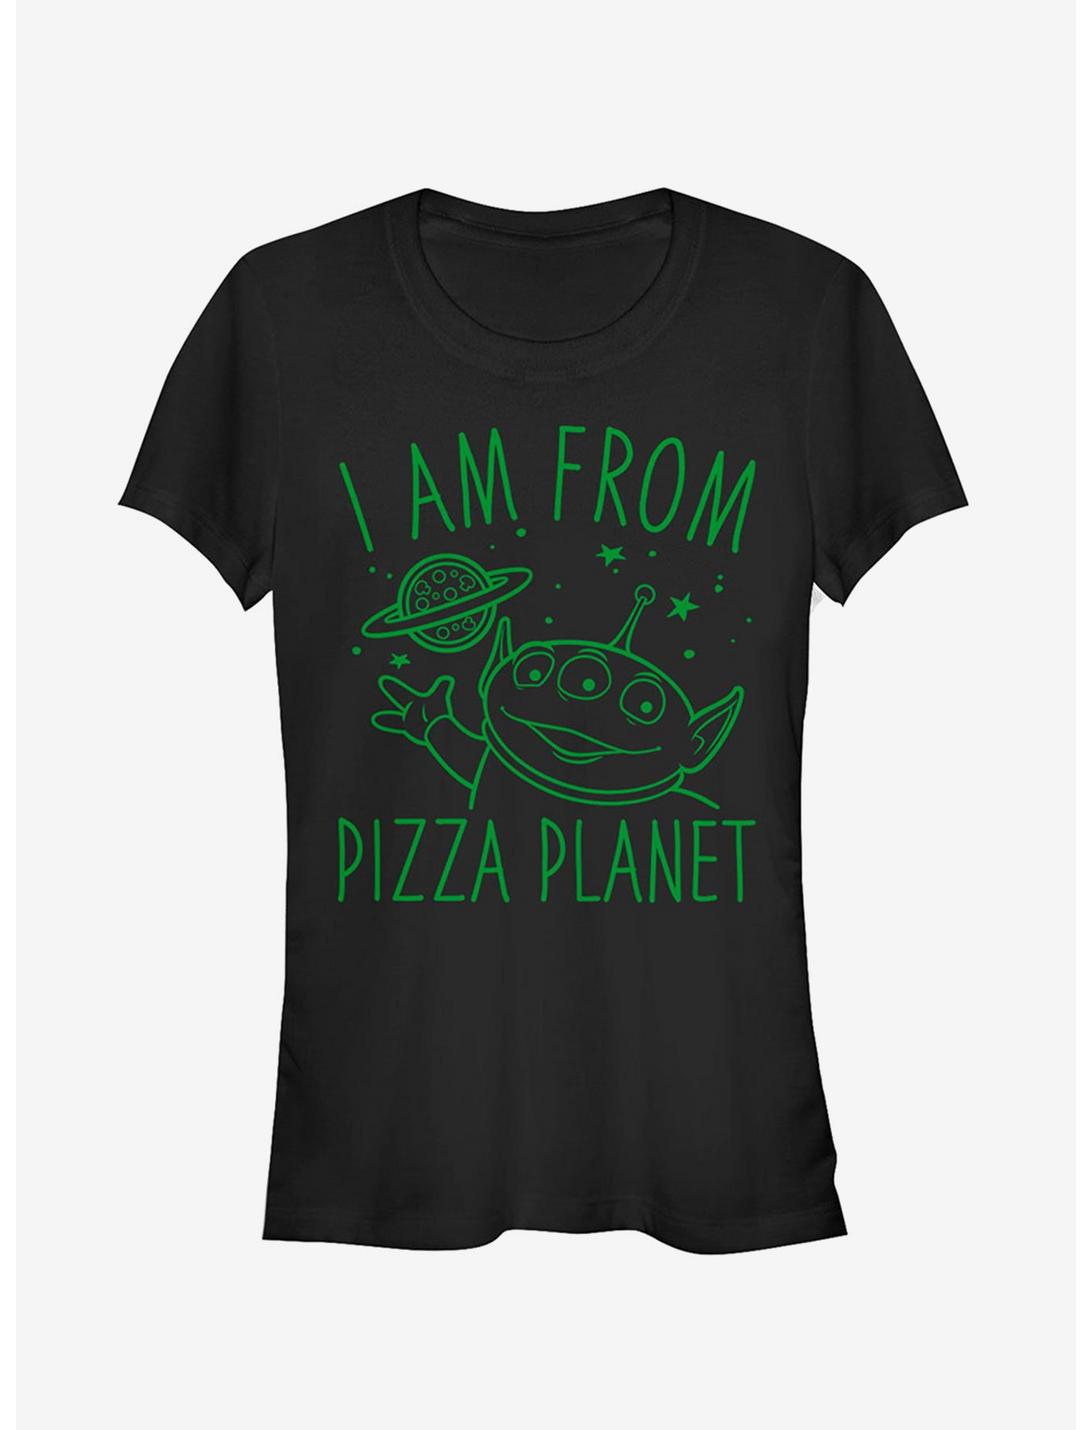 Disney Pixar Toy Story Come in Peace from Pizza Planet Girls T-Shirt, BLACK, hi-res